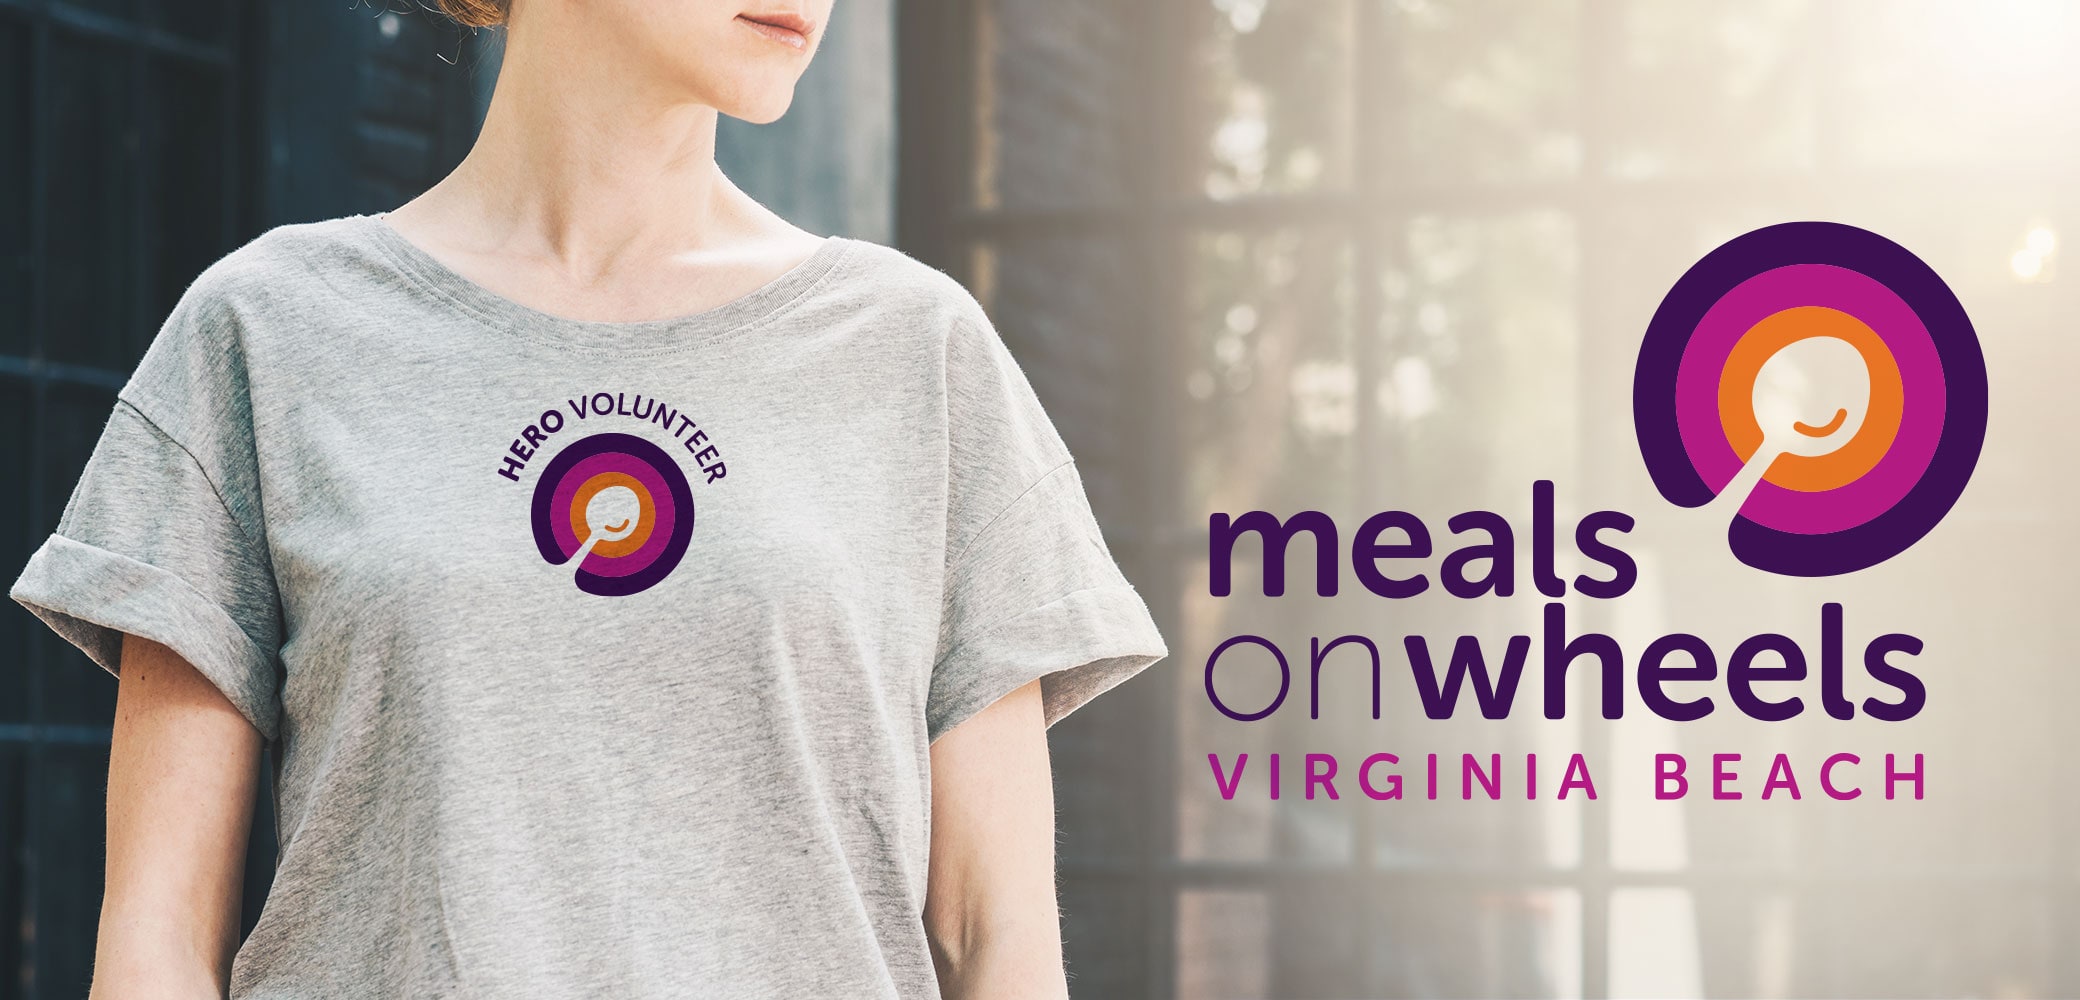 Meals on Wheels of Virginia Beach brand identity design by Red Chalk Studios